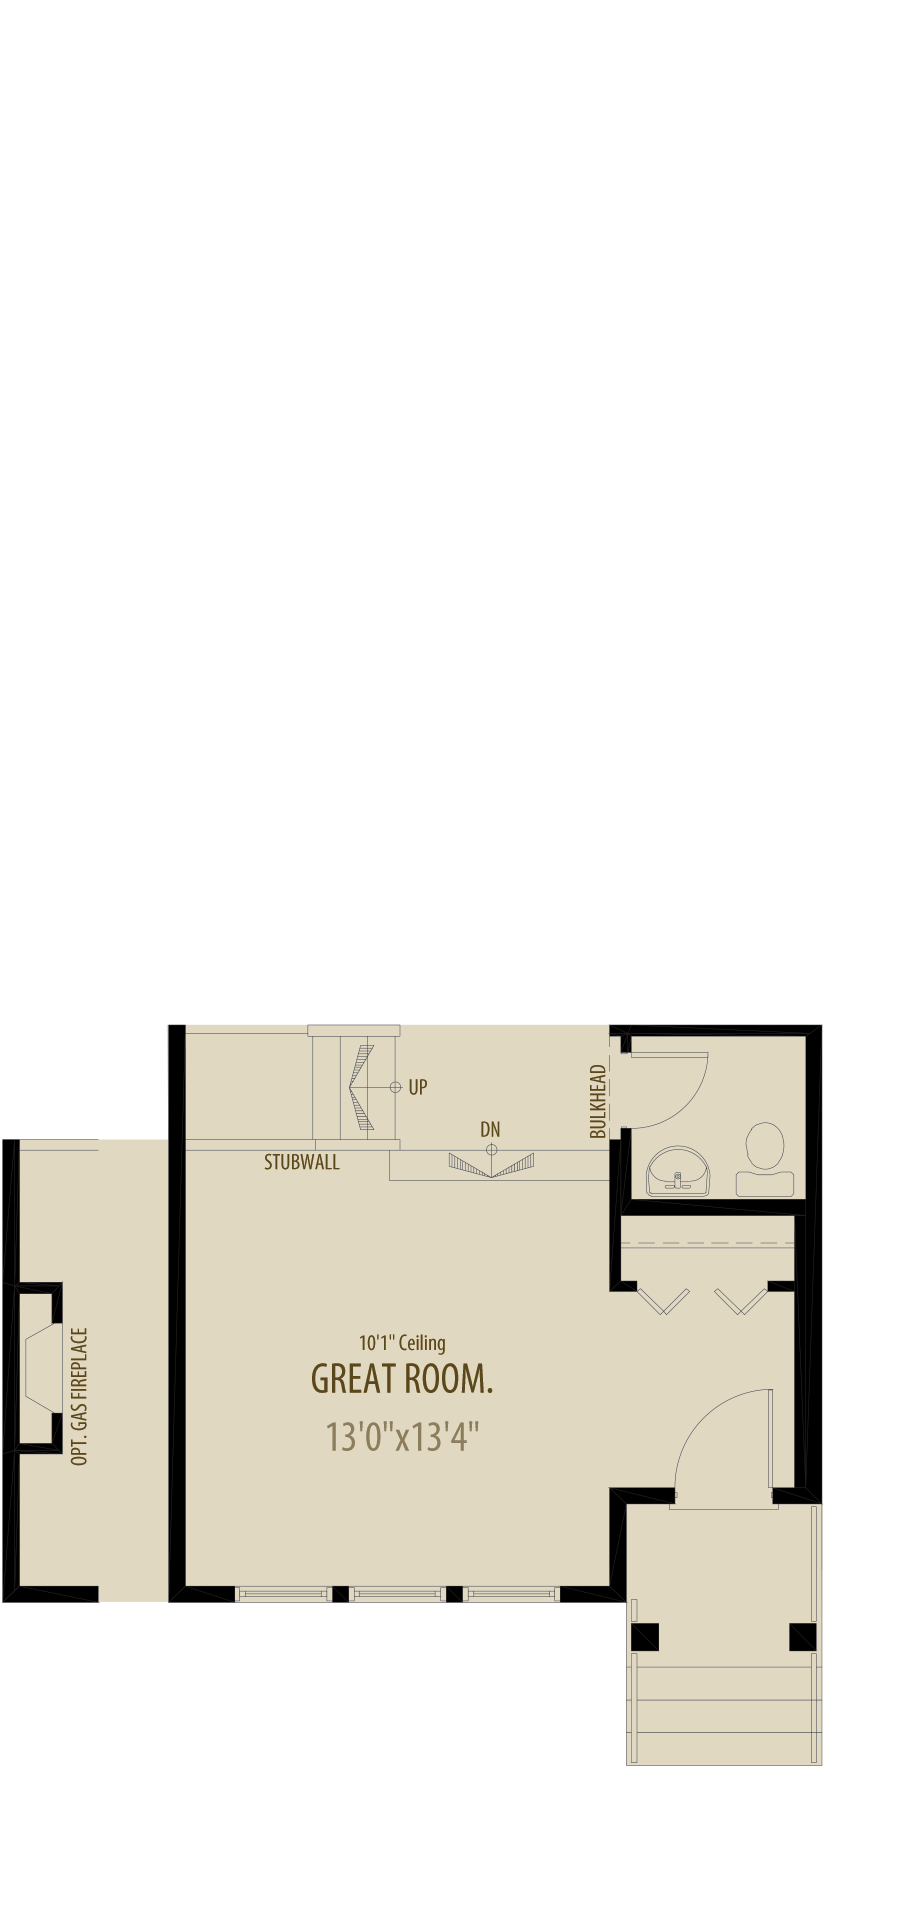 Grand Great Room